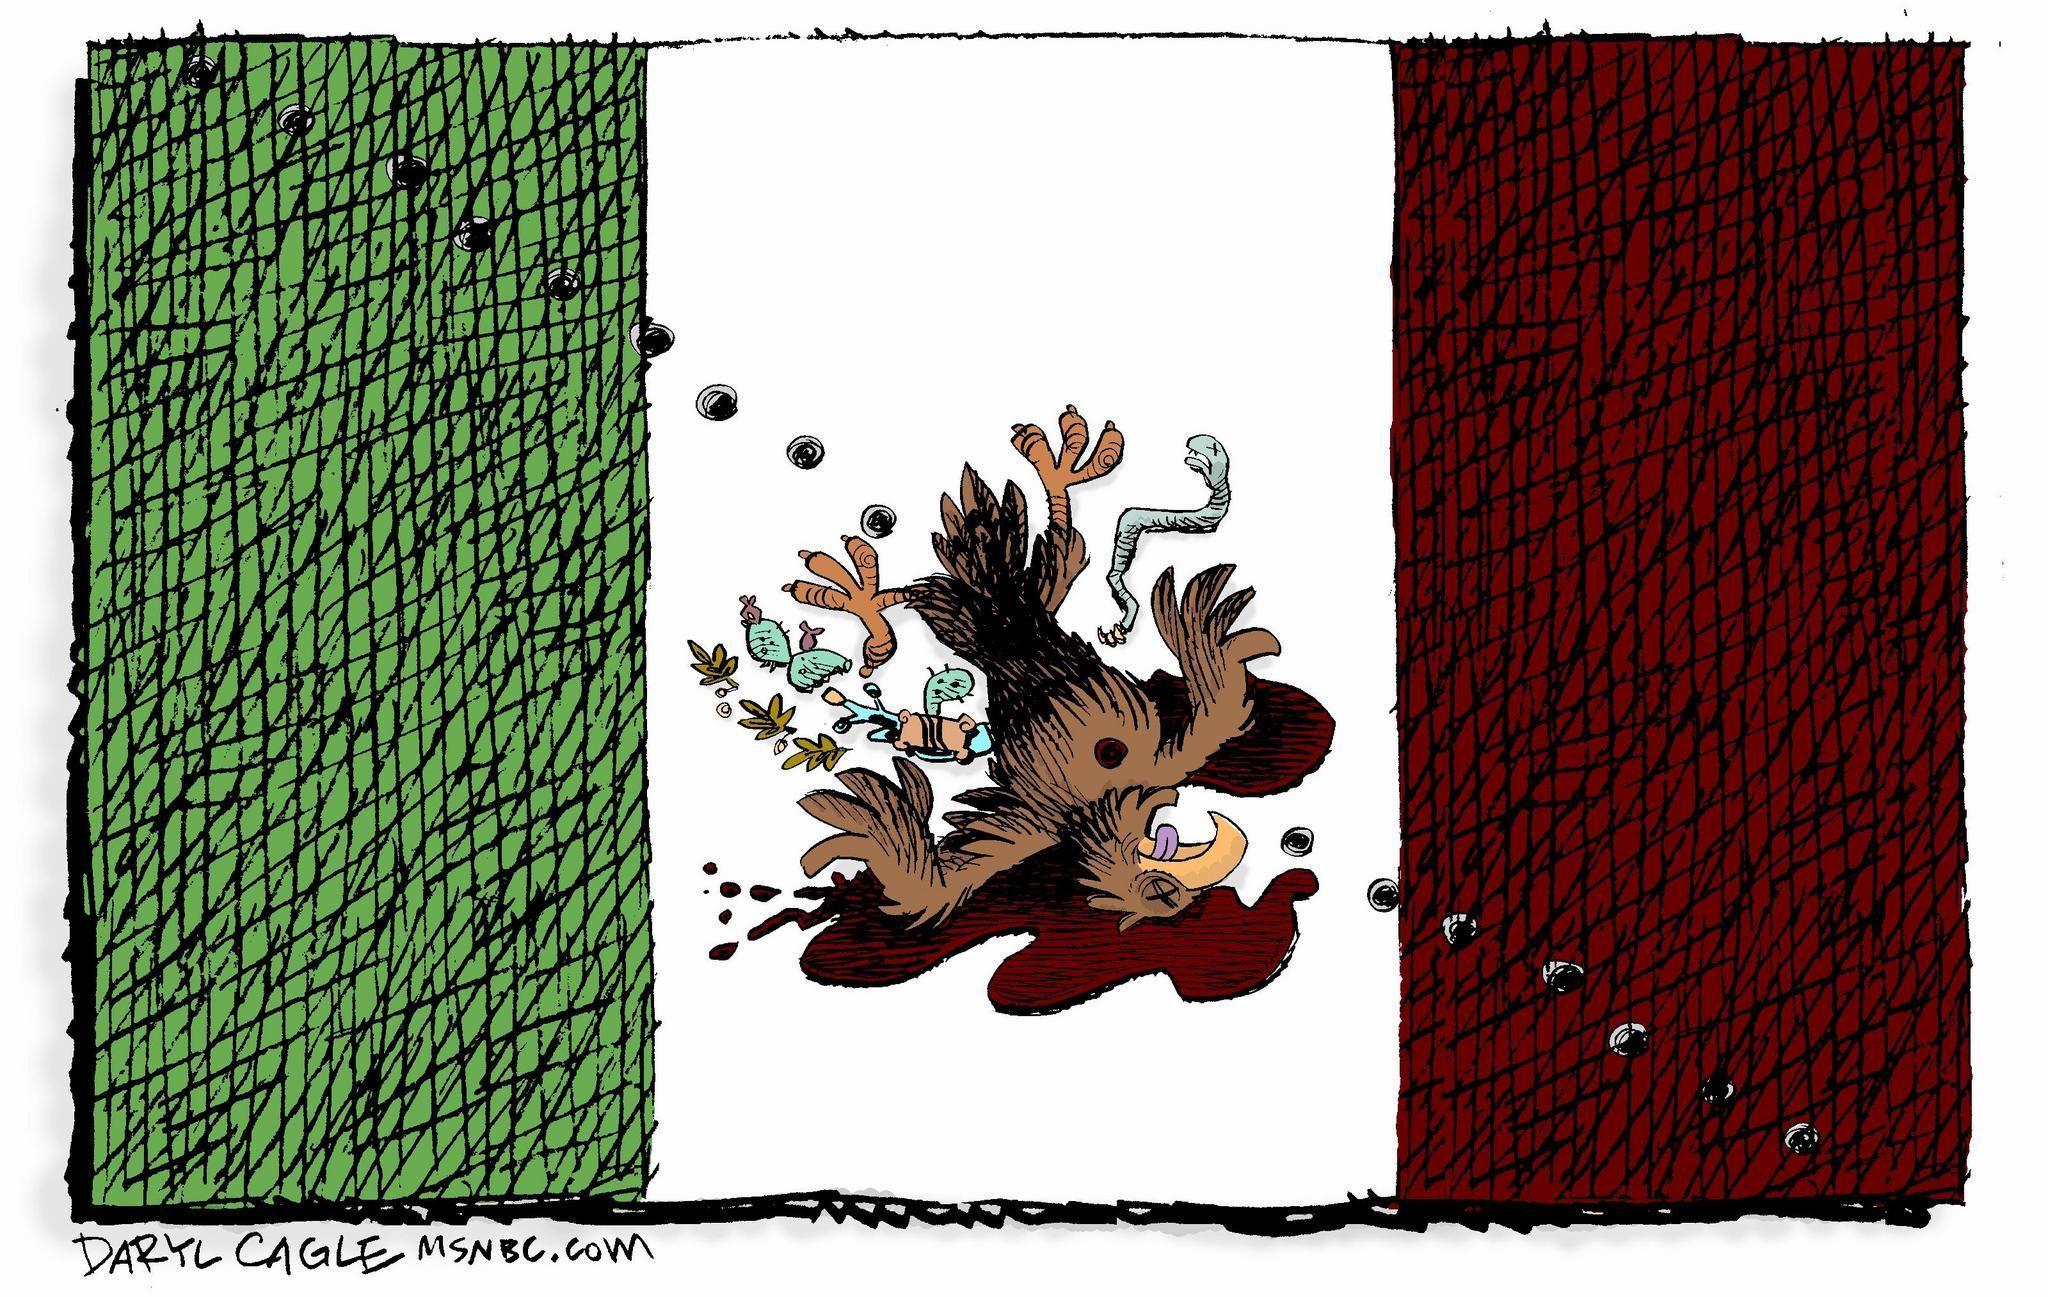 Mexican Flag Bird Logo - My Mexican flag Cartoon and angry readers